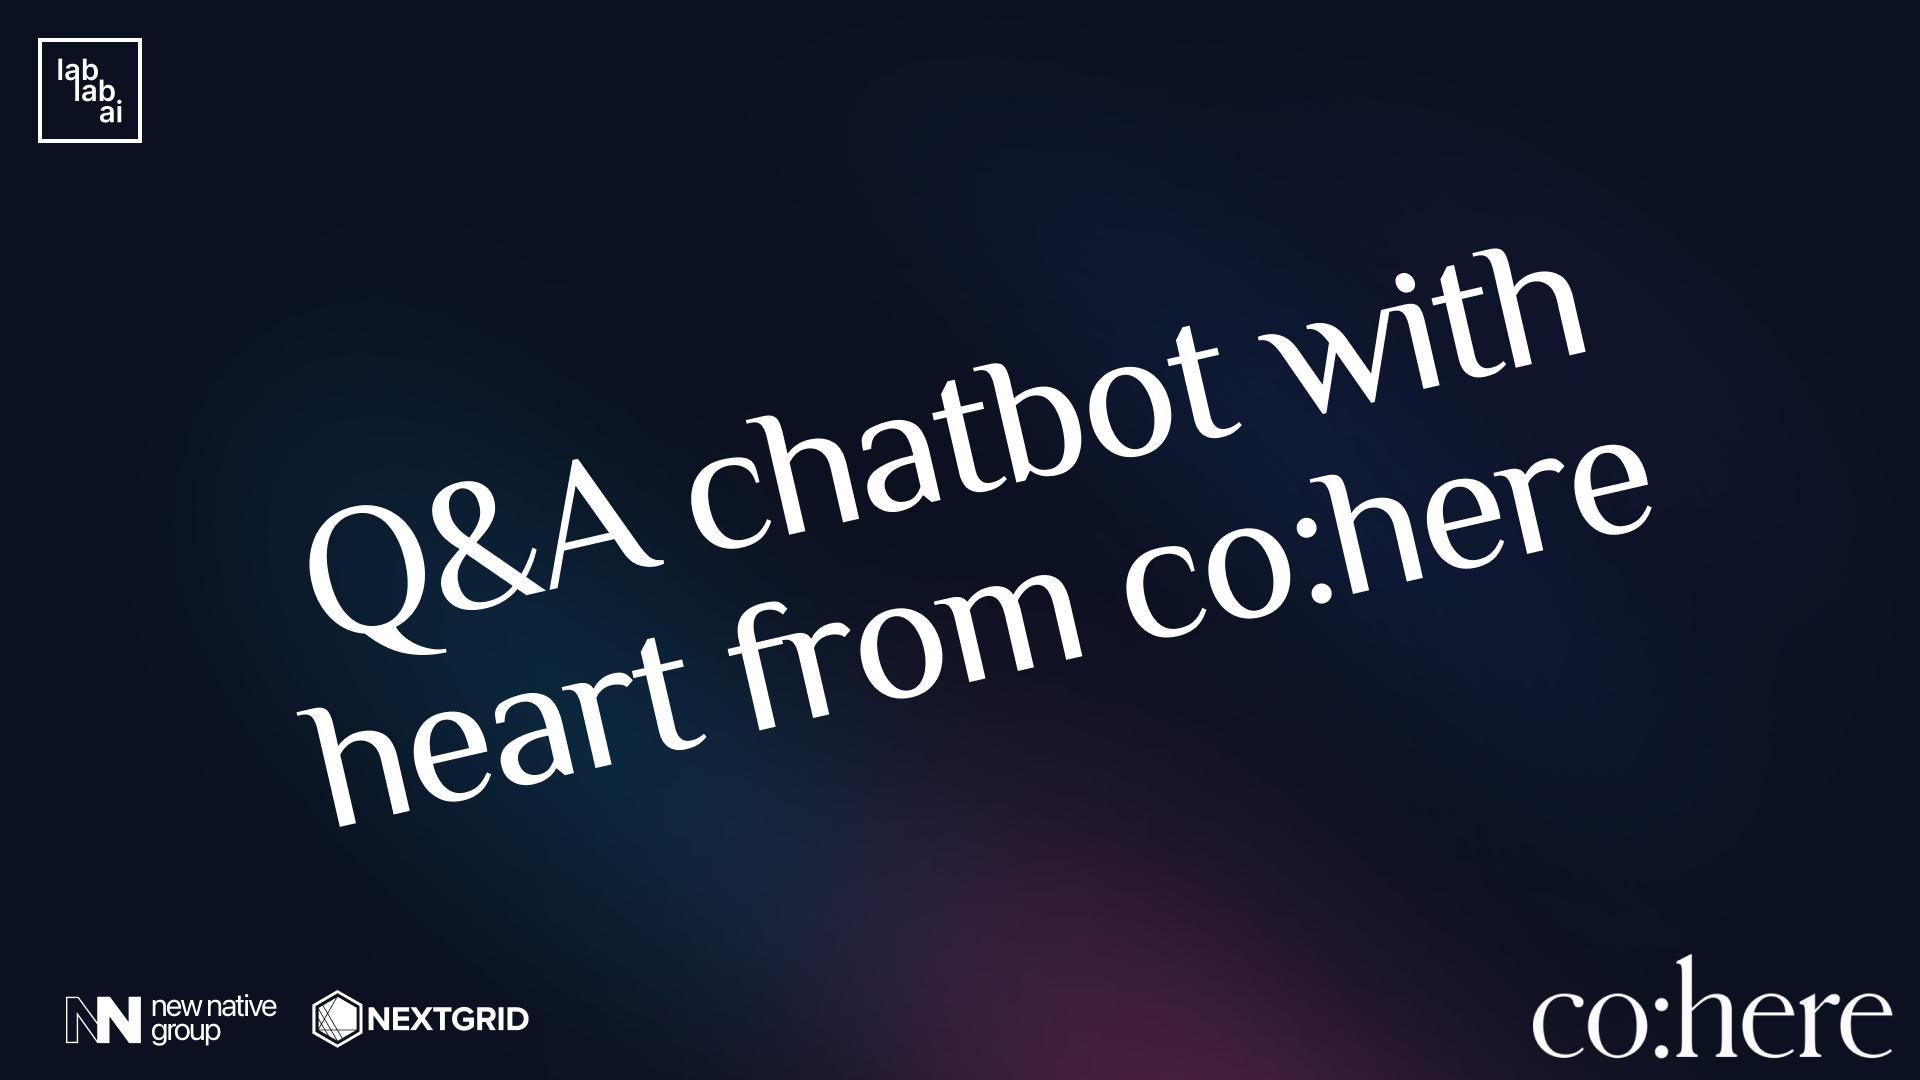 Cohere tutorial: Q&A chatbot with heart from Cohere tutorial